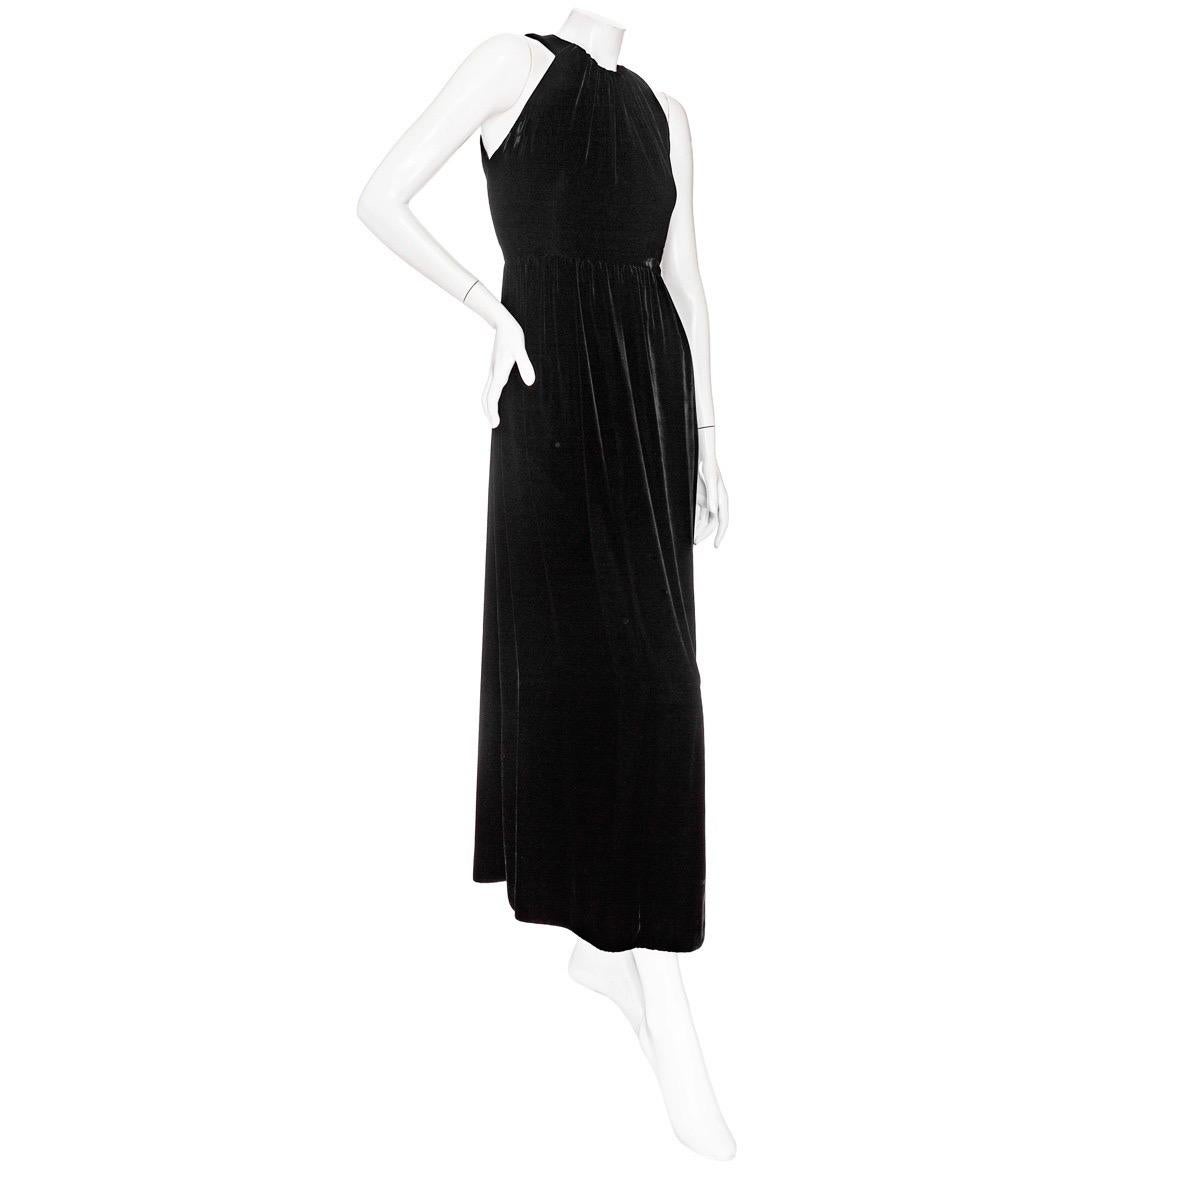 Yves Saint Laurent Vintage Haute Couture Black Velvet Halter Dress

Vintage; circa 1960s
Black
Velvet
Round gathered halter neckline with hook and eye fastening
Fitted bodice
Maxi length
Made in France
No fabric composition label; likely silk or